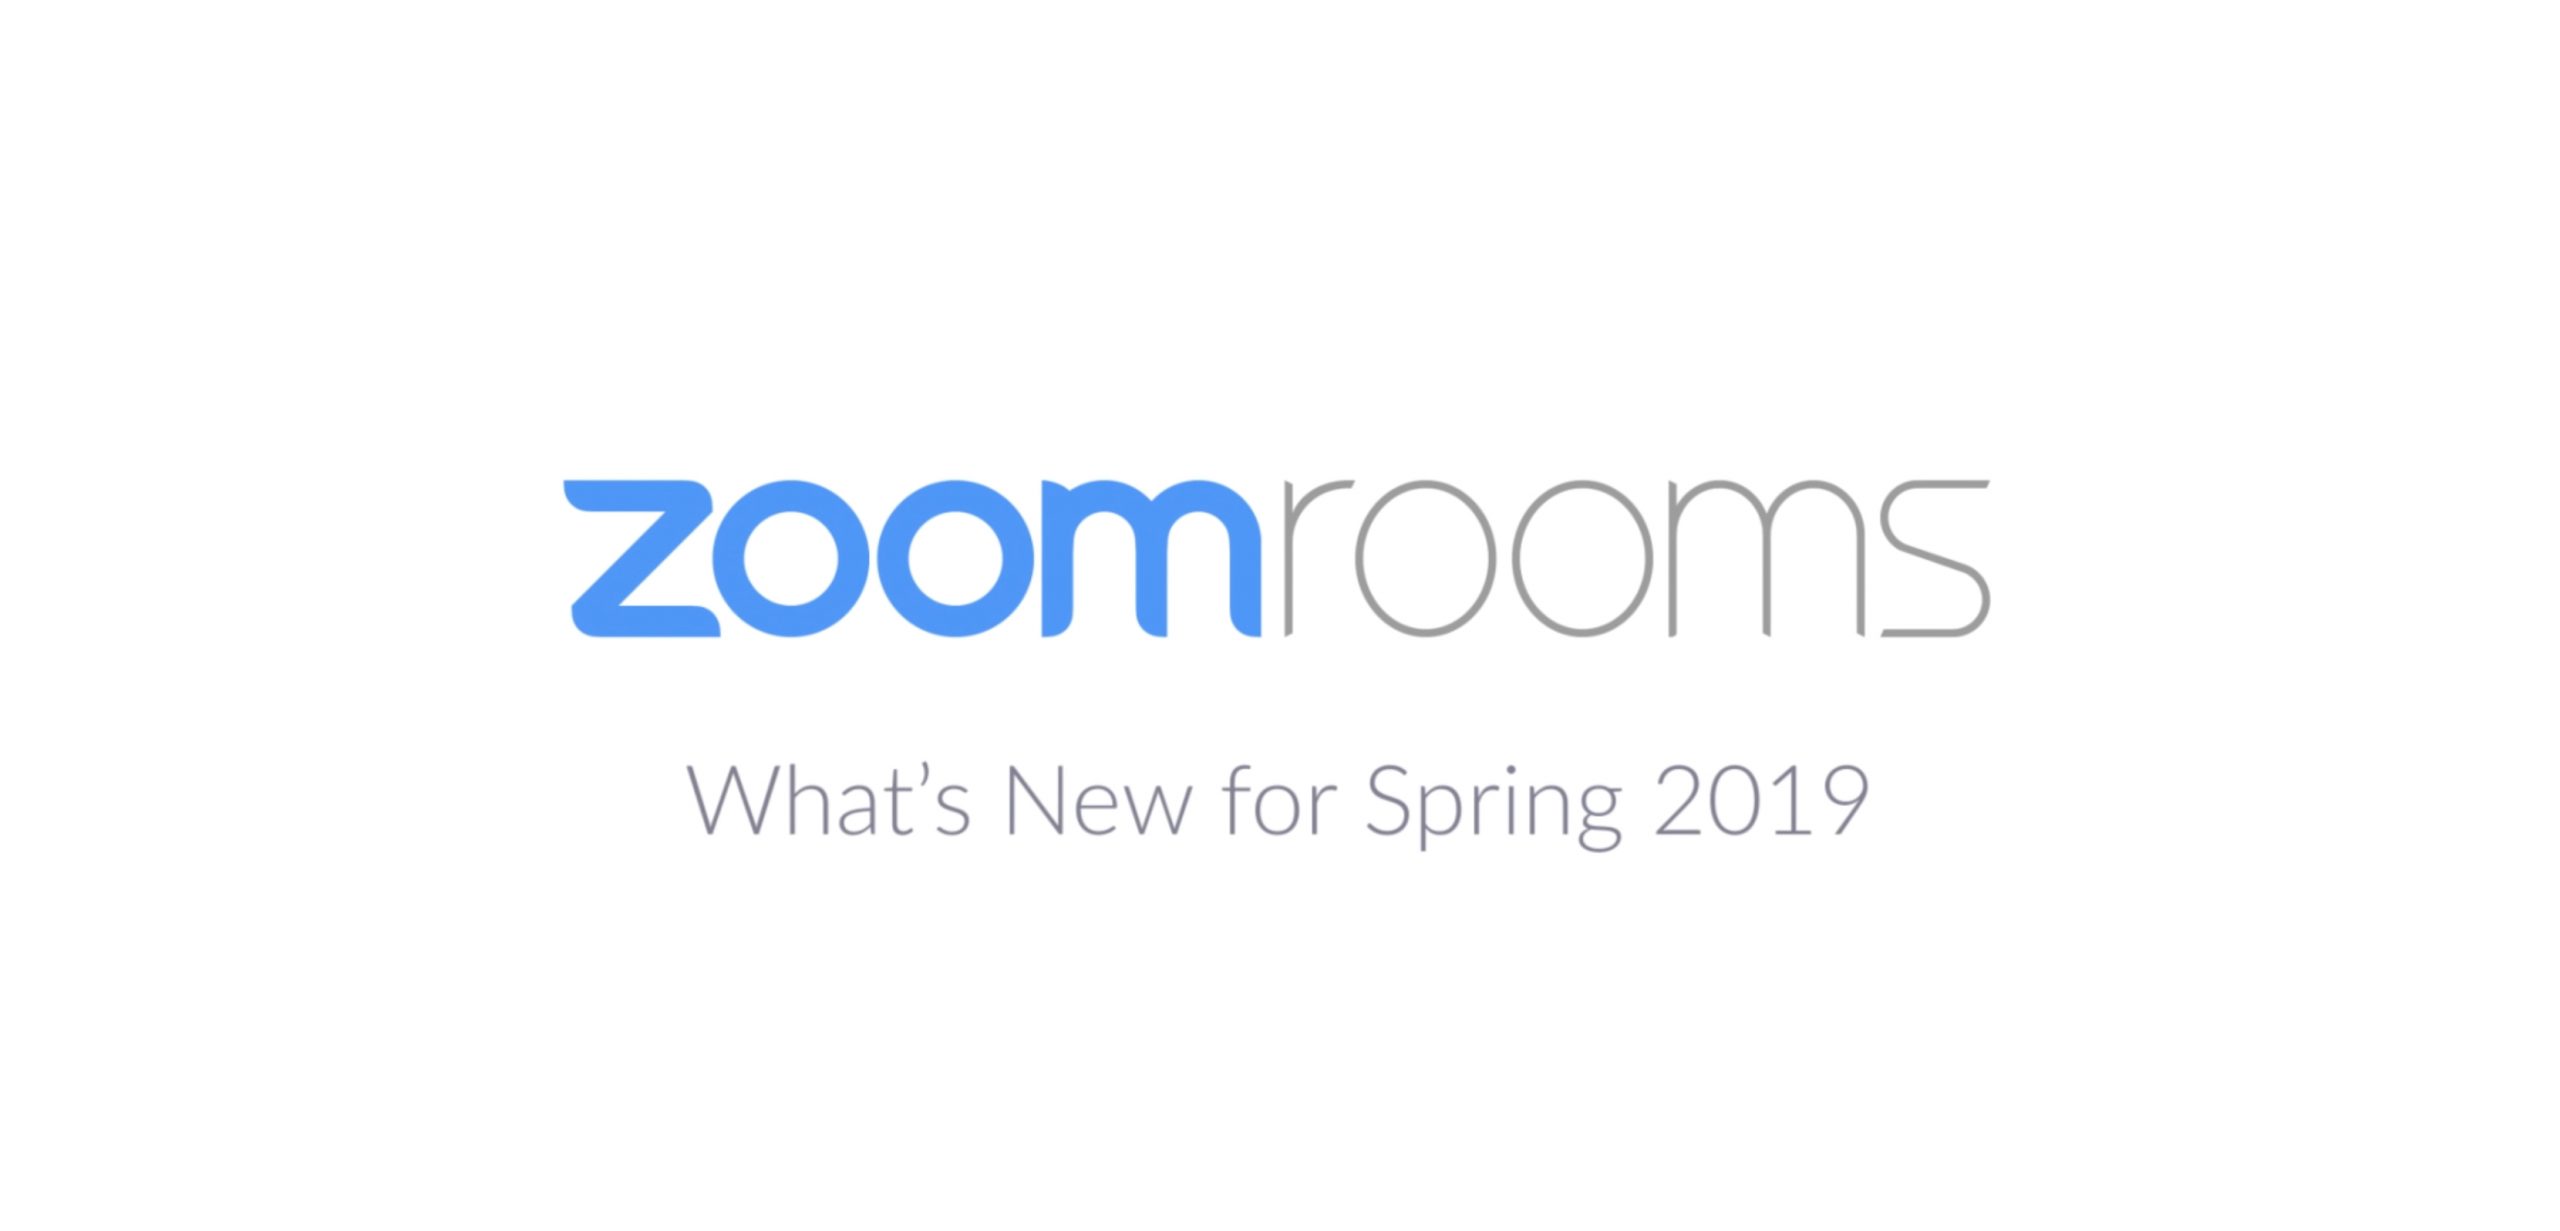 Zoom Rooms Are Now More Intelligent And Collaborative Than Ever